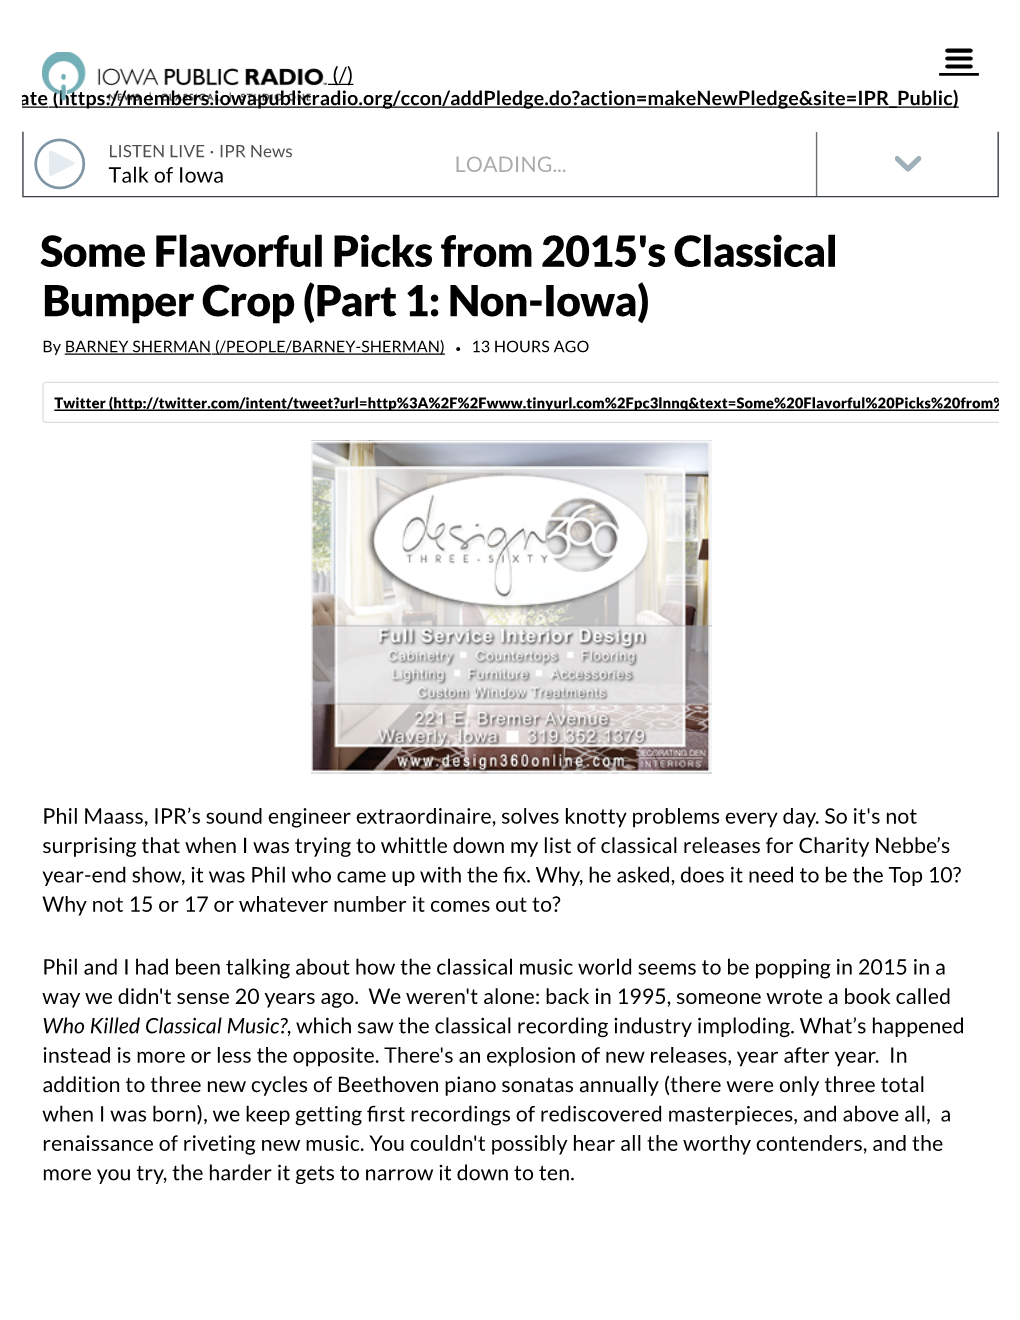 Some Flavorful Picks from 2015'S Classical Bumper Crop (Part 1: Non-Iowa)